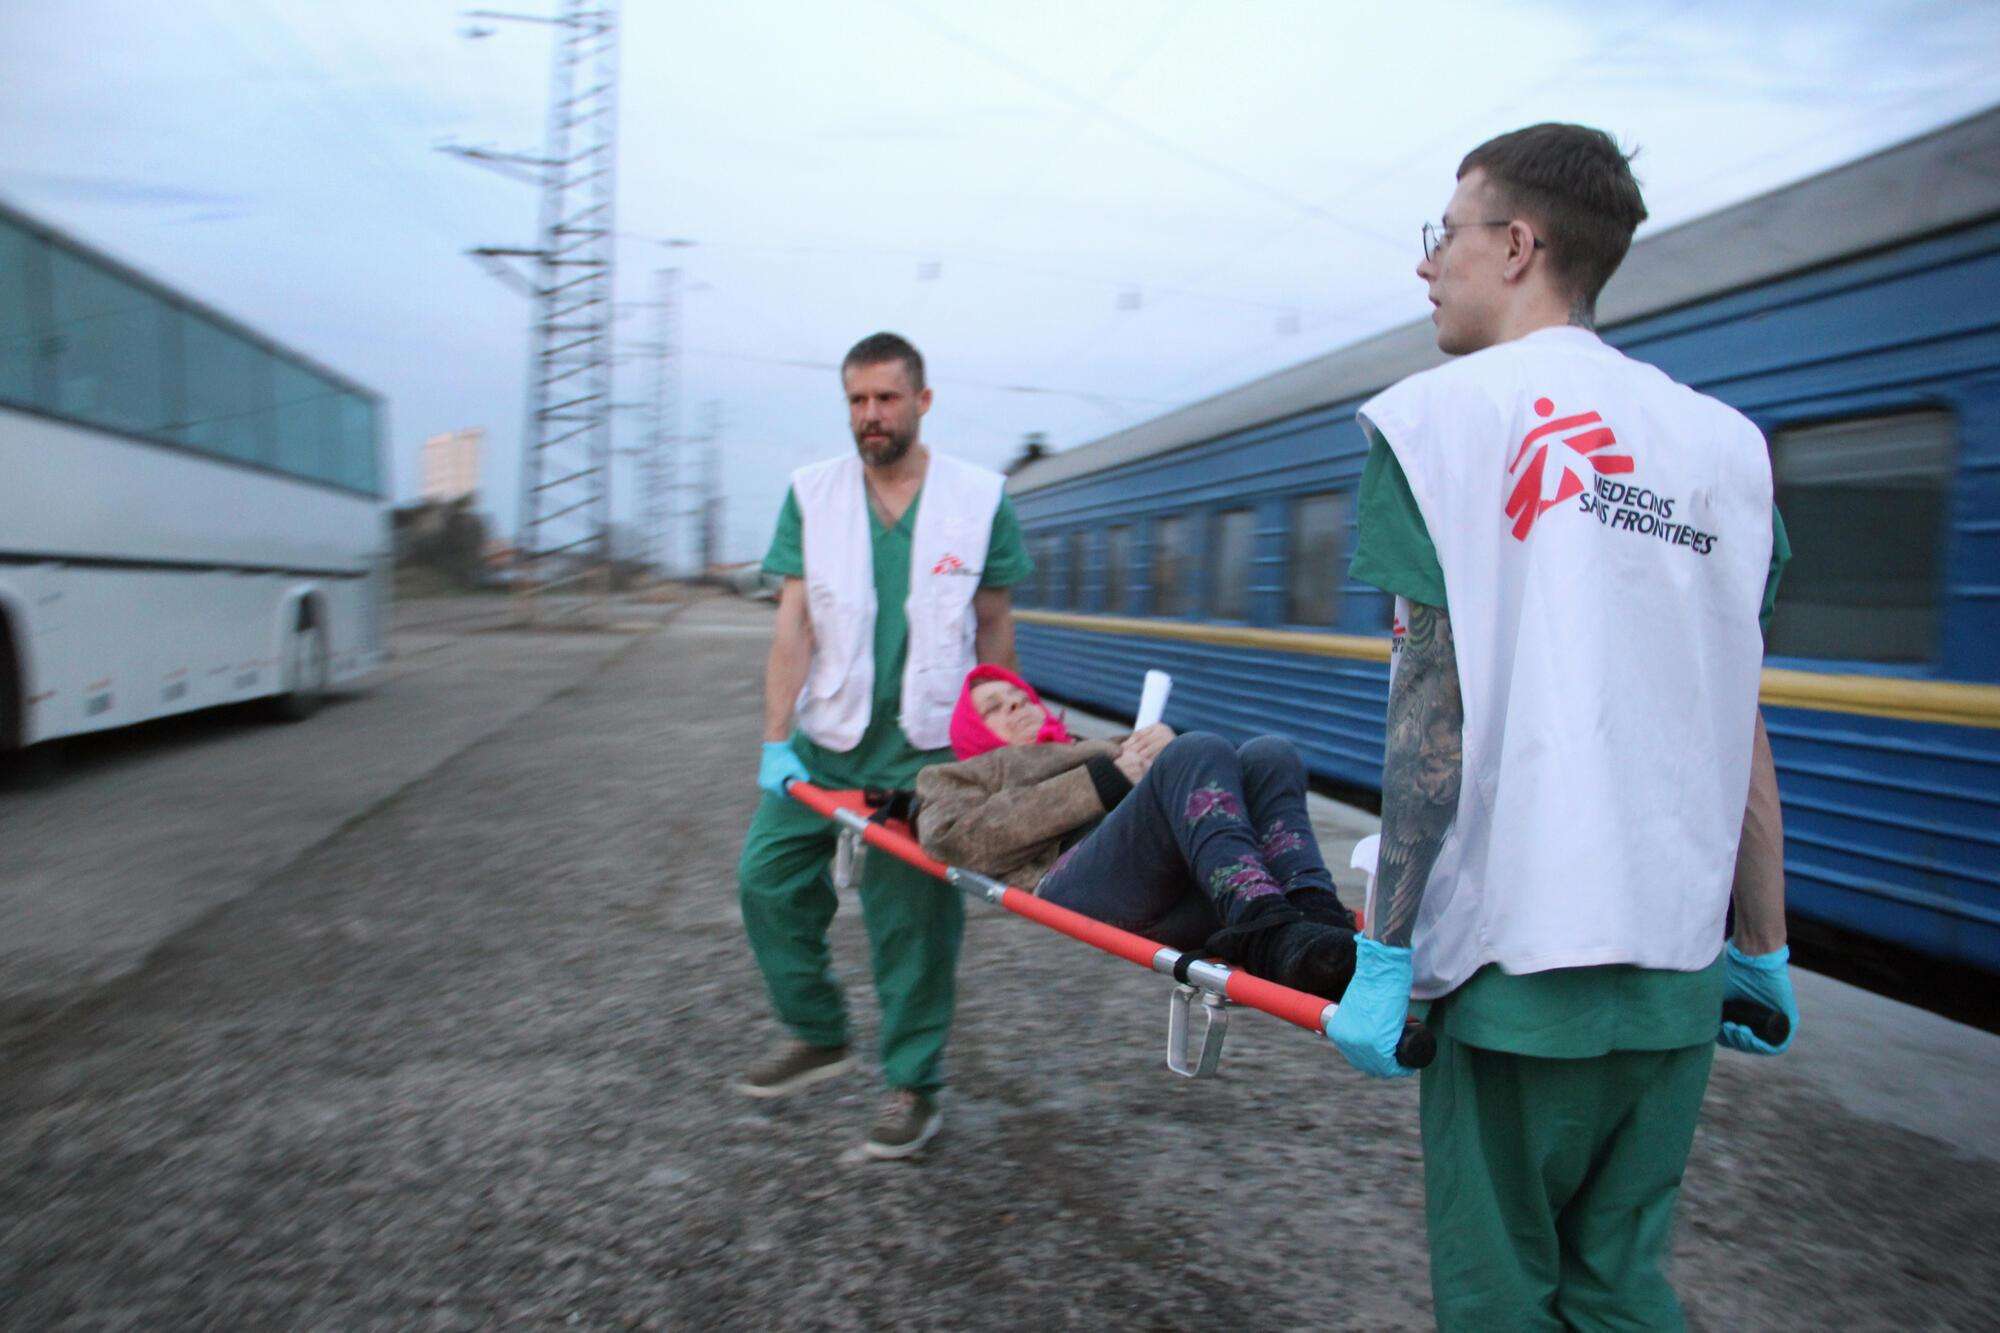 MSF staff members transport a patient from our medical train after its arrival in Lviv from Kramatorsk on April 7, 2022. The train evacuates patients in need of higher levels of care from hospitals close to the front lines.